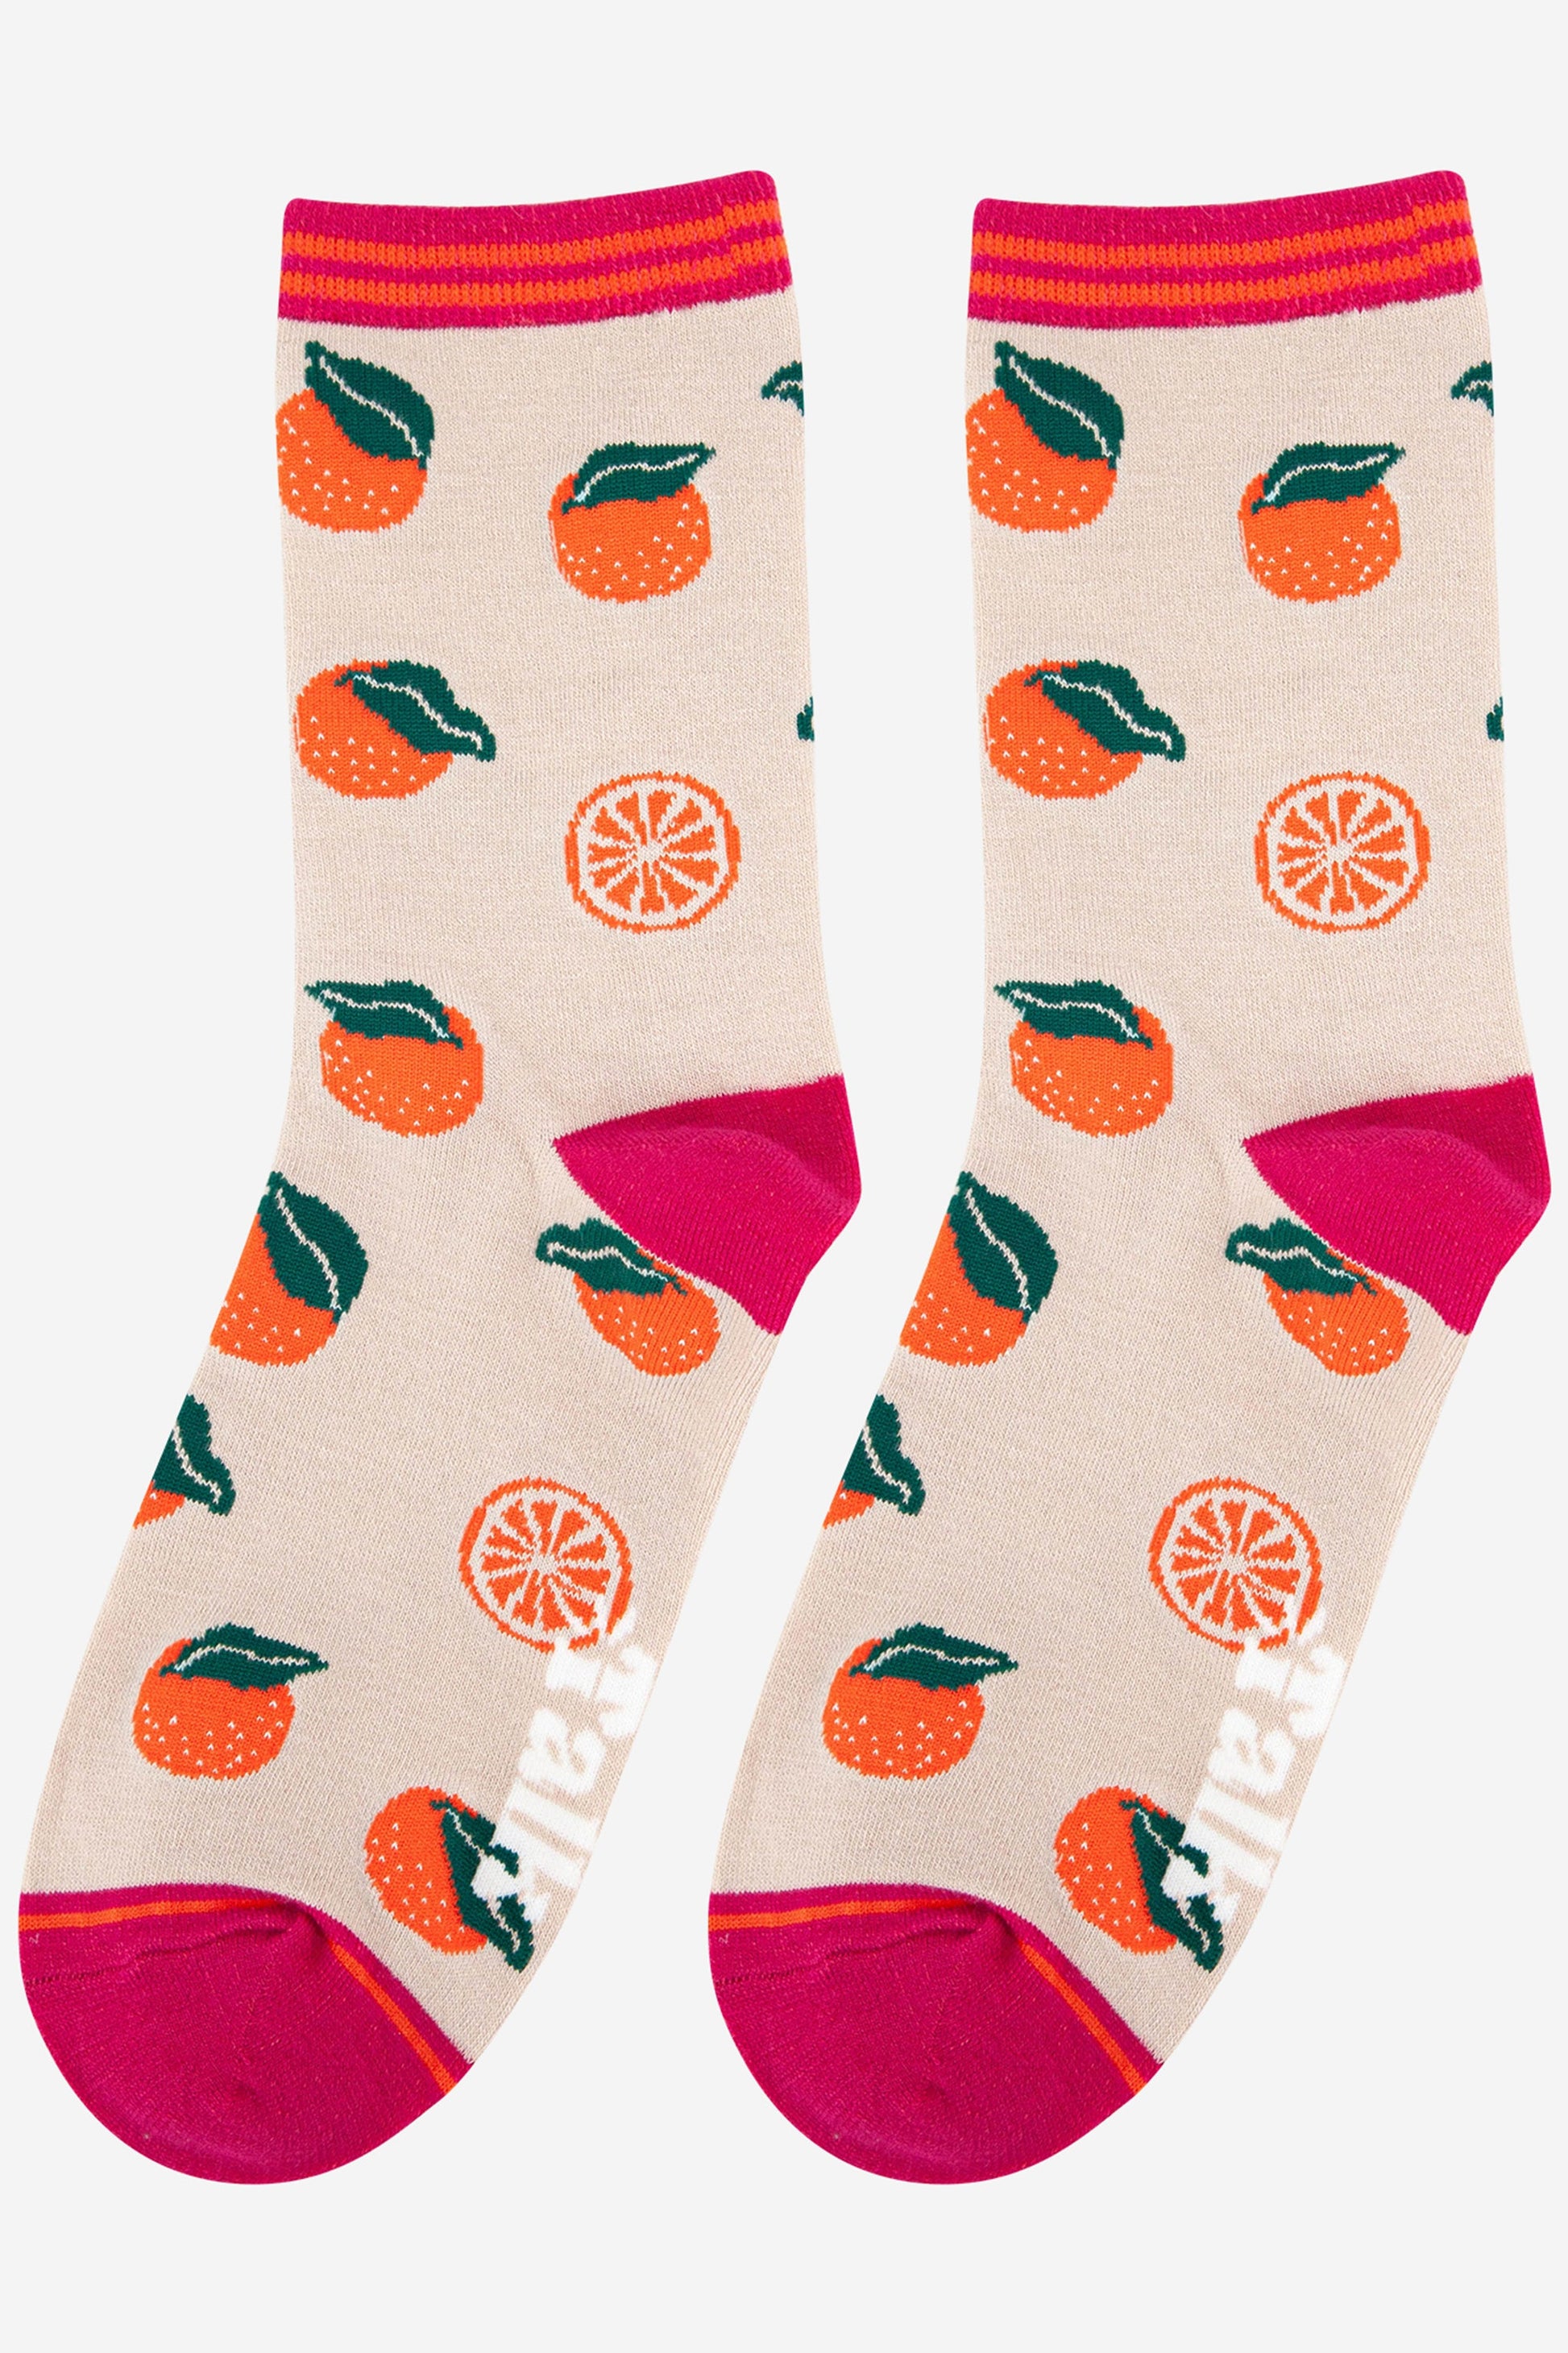 womens oranges fruit socks made from bamboo. Cream socks with oranges all over and a pink toe, heel and cuff